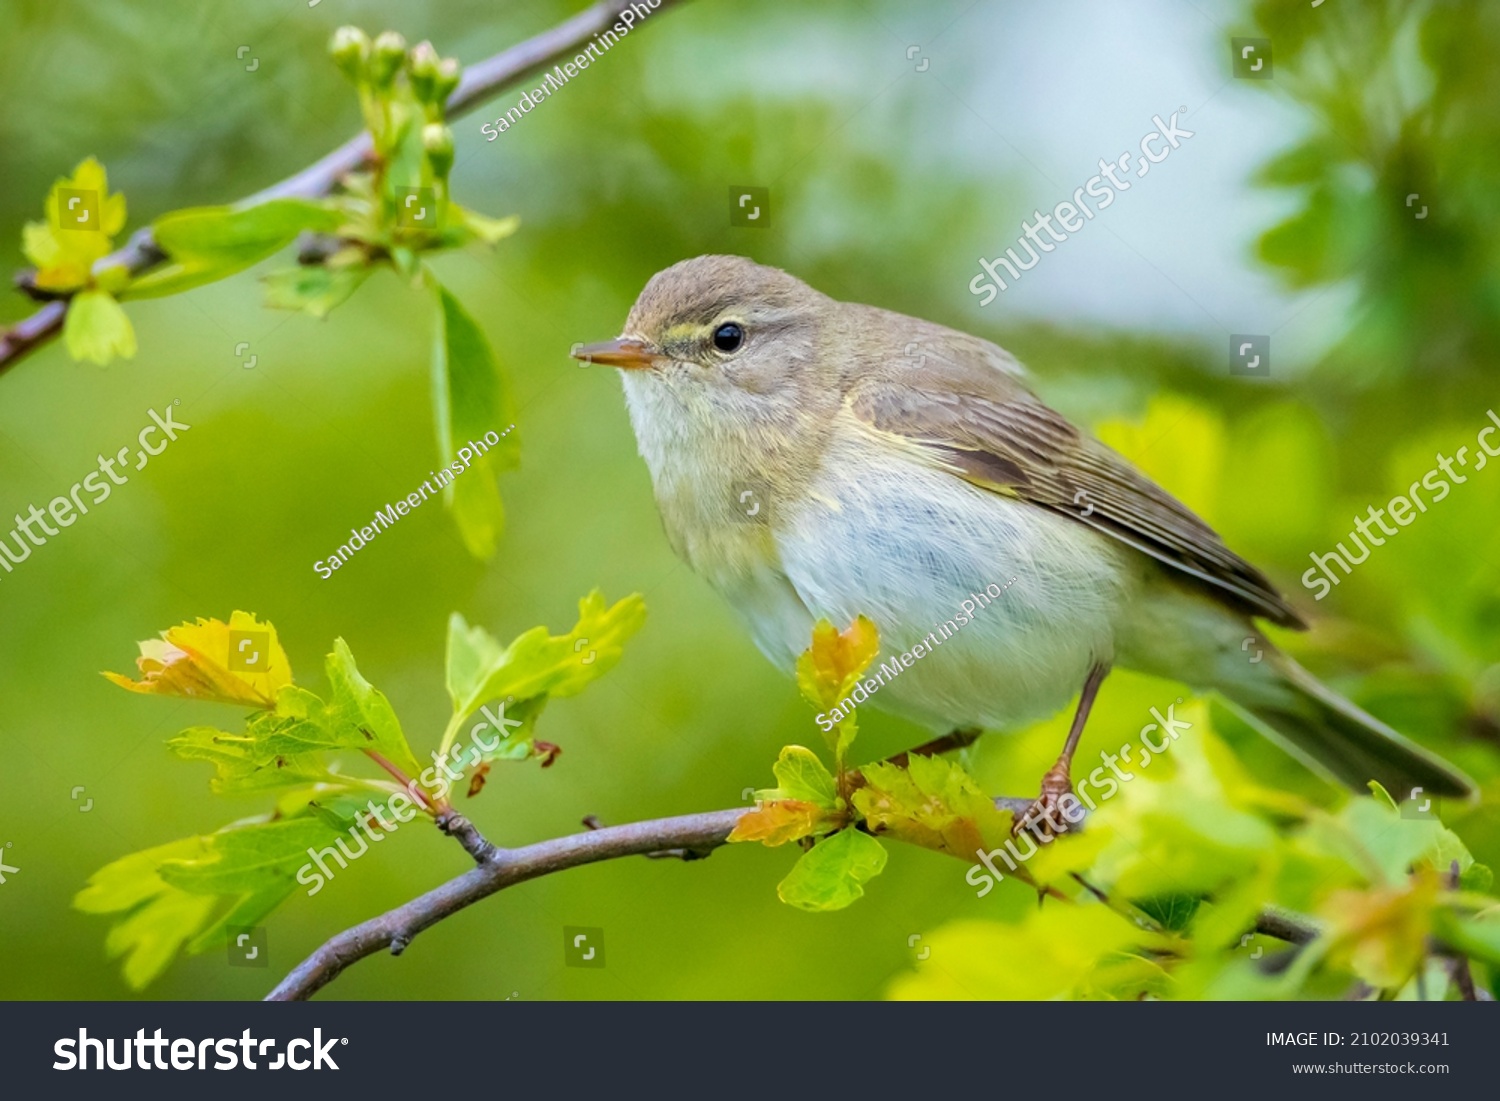 Close-up of a Willow warbler bird, Phylloscopus trochilus, singing on a beautiful summer evening with soft backlight on a green vibrant background. #2102039341